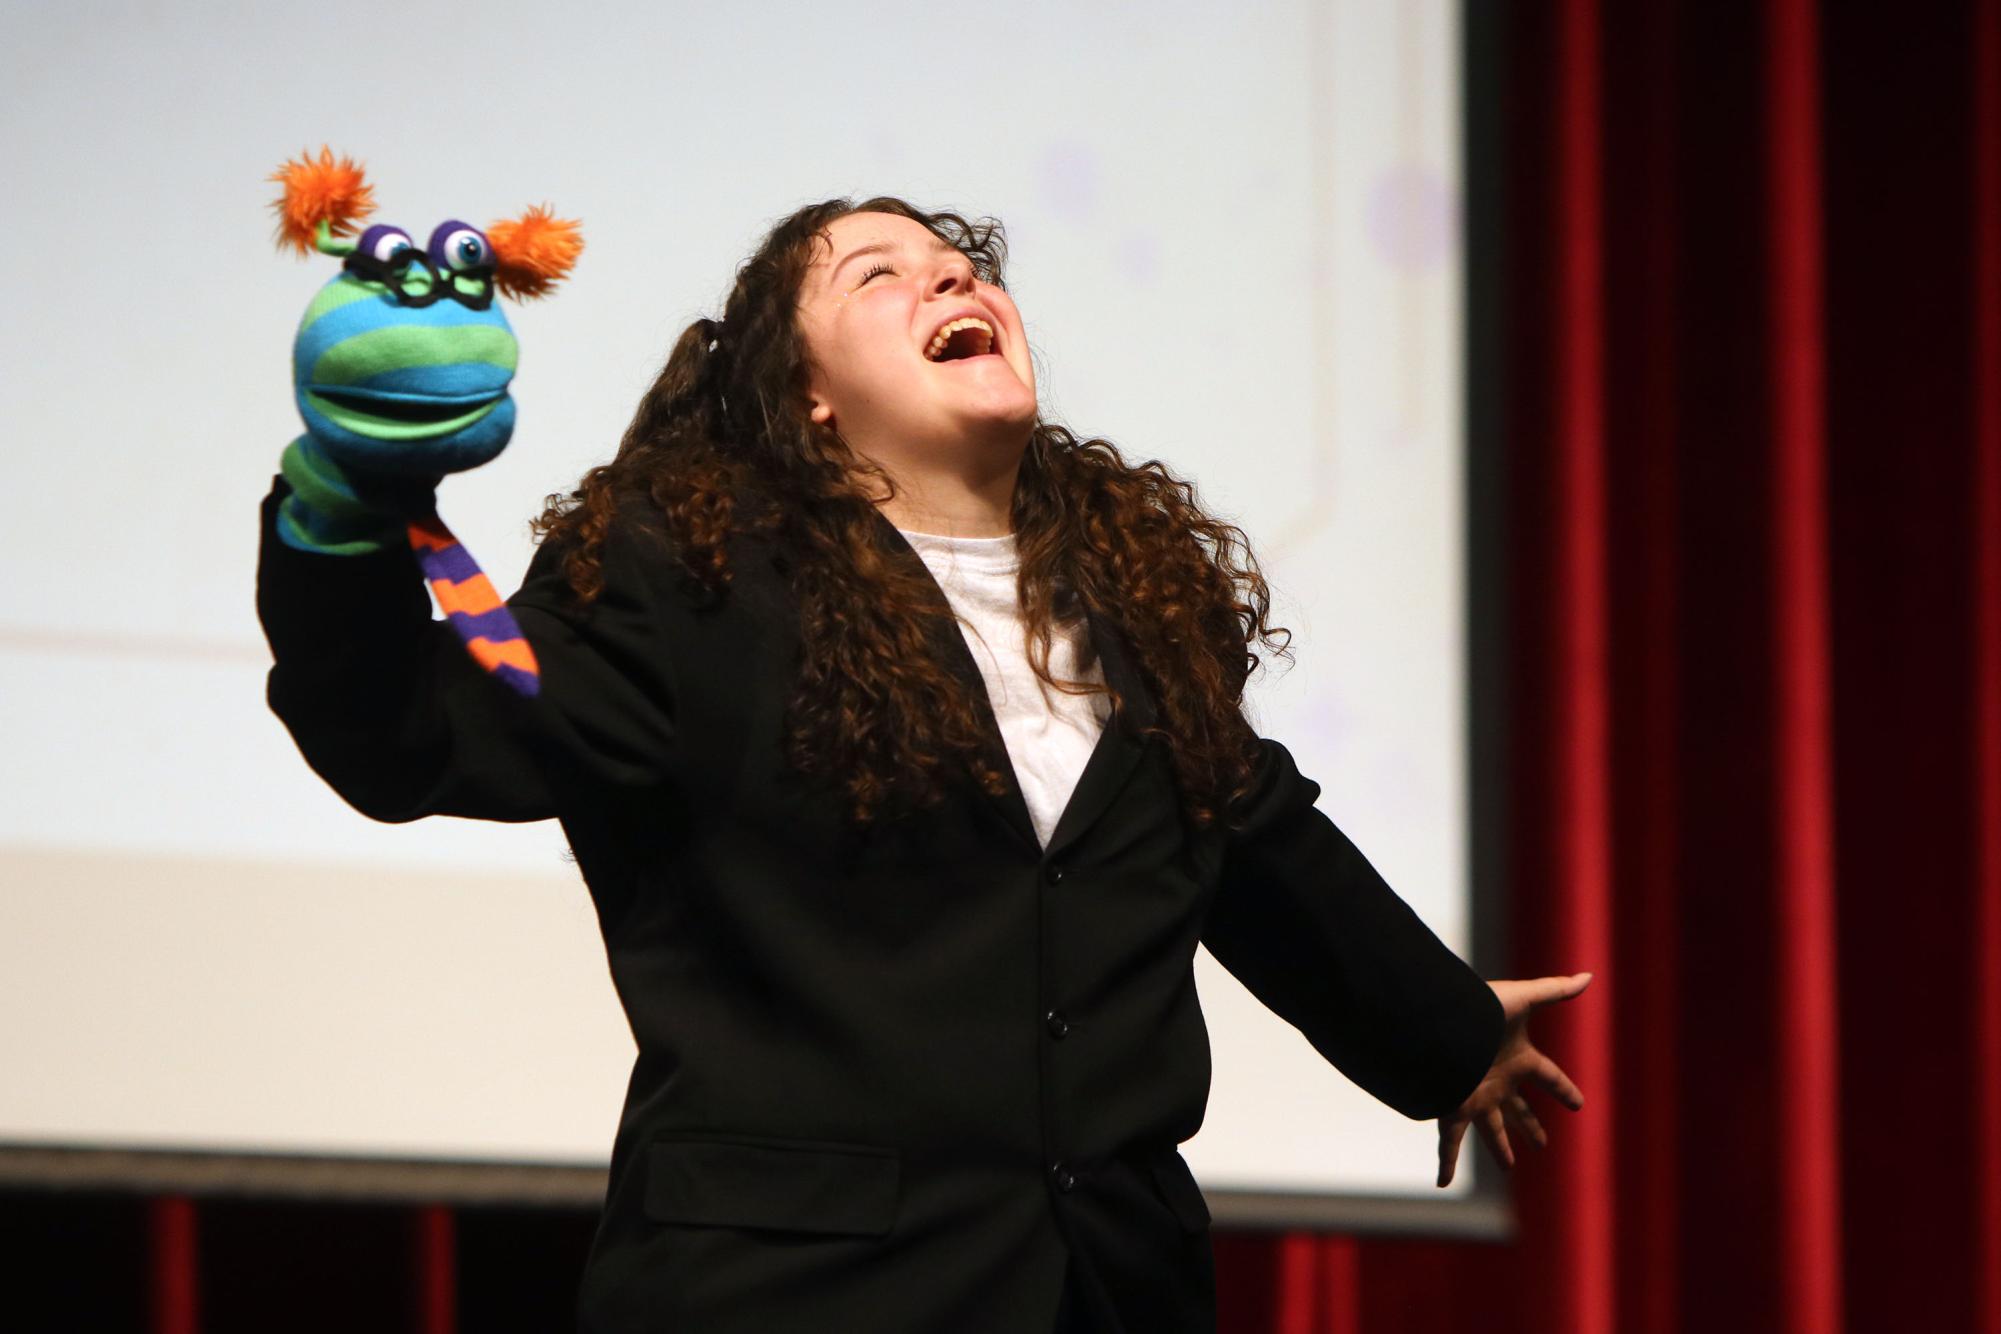 Zoie Wessling sings Man or Muppet from the 2011 movie The Muppets. Photo by Marissa Gergen.